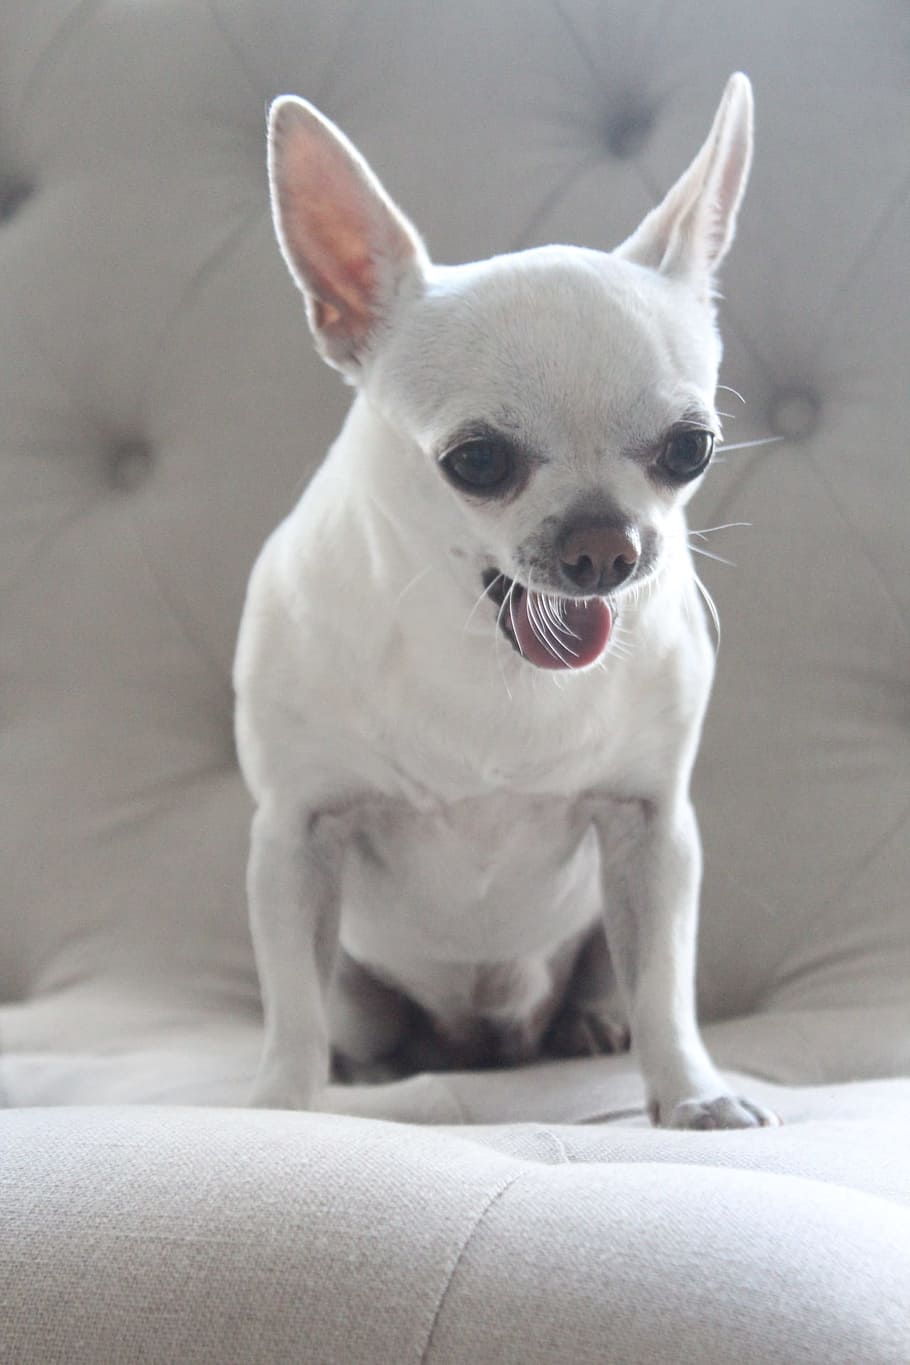 chihuahua, dog, pet, animal, cute, funny, canine, small, purebred, white